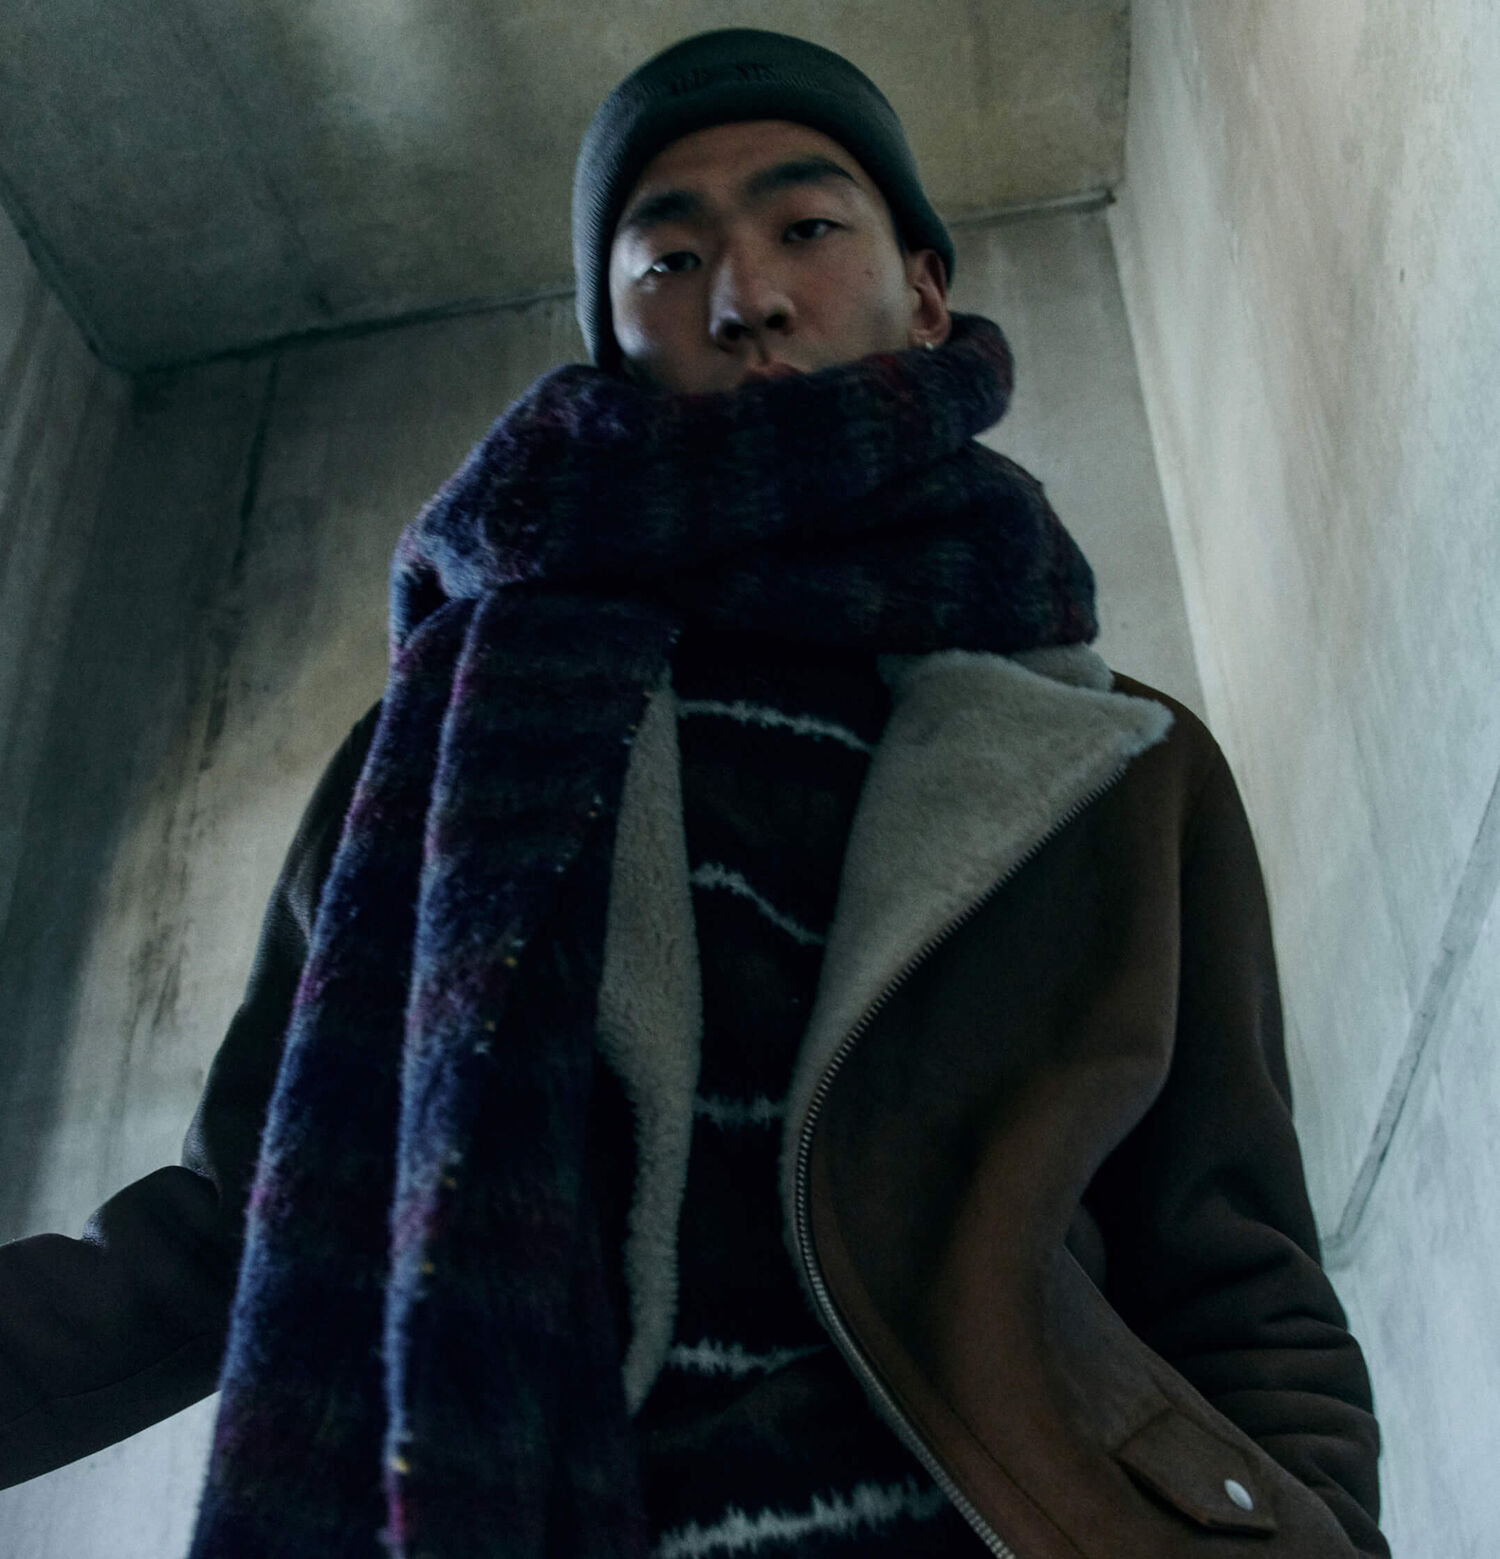 Man wearing a thick blanket scarf with a shearling leather jacket and beanie